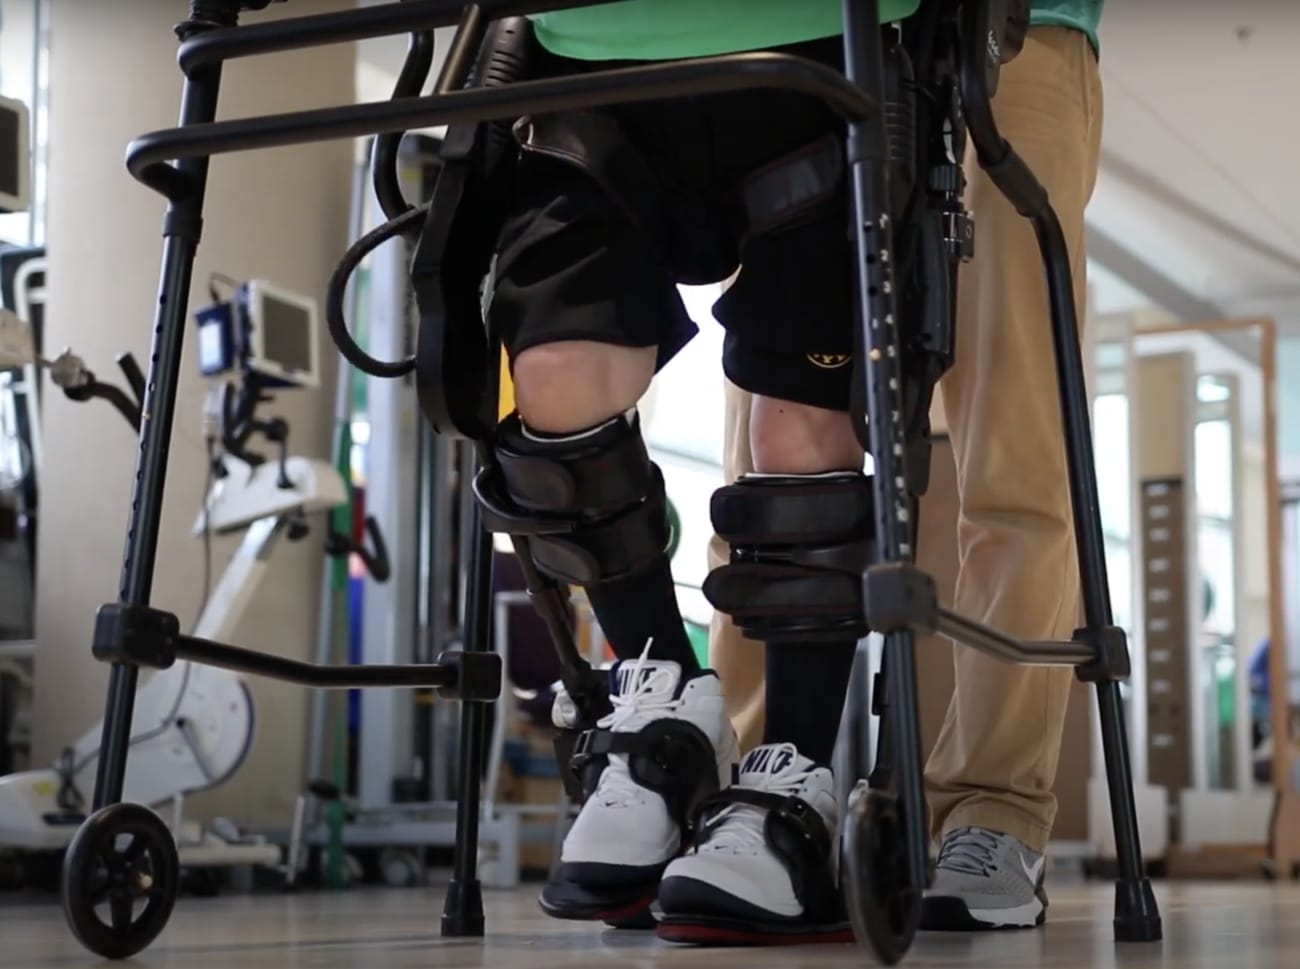 Comprehensive Care for Patients With Spinal Cord Injury and Disease